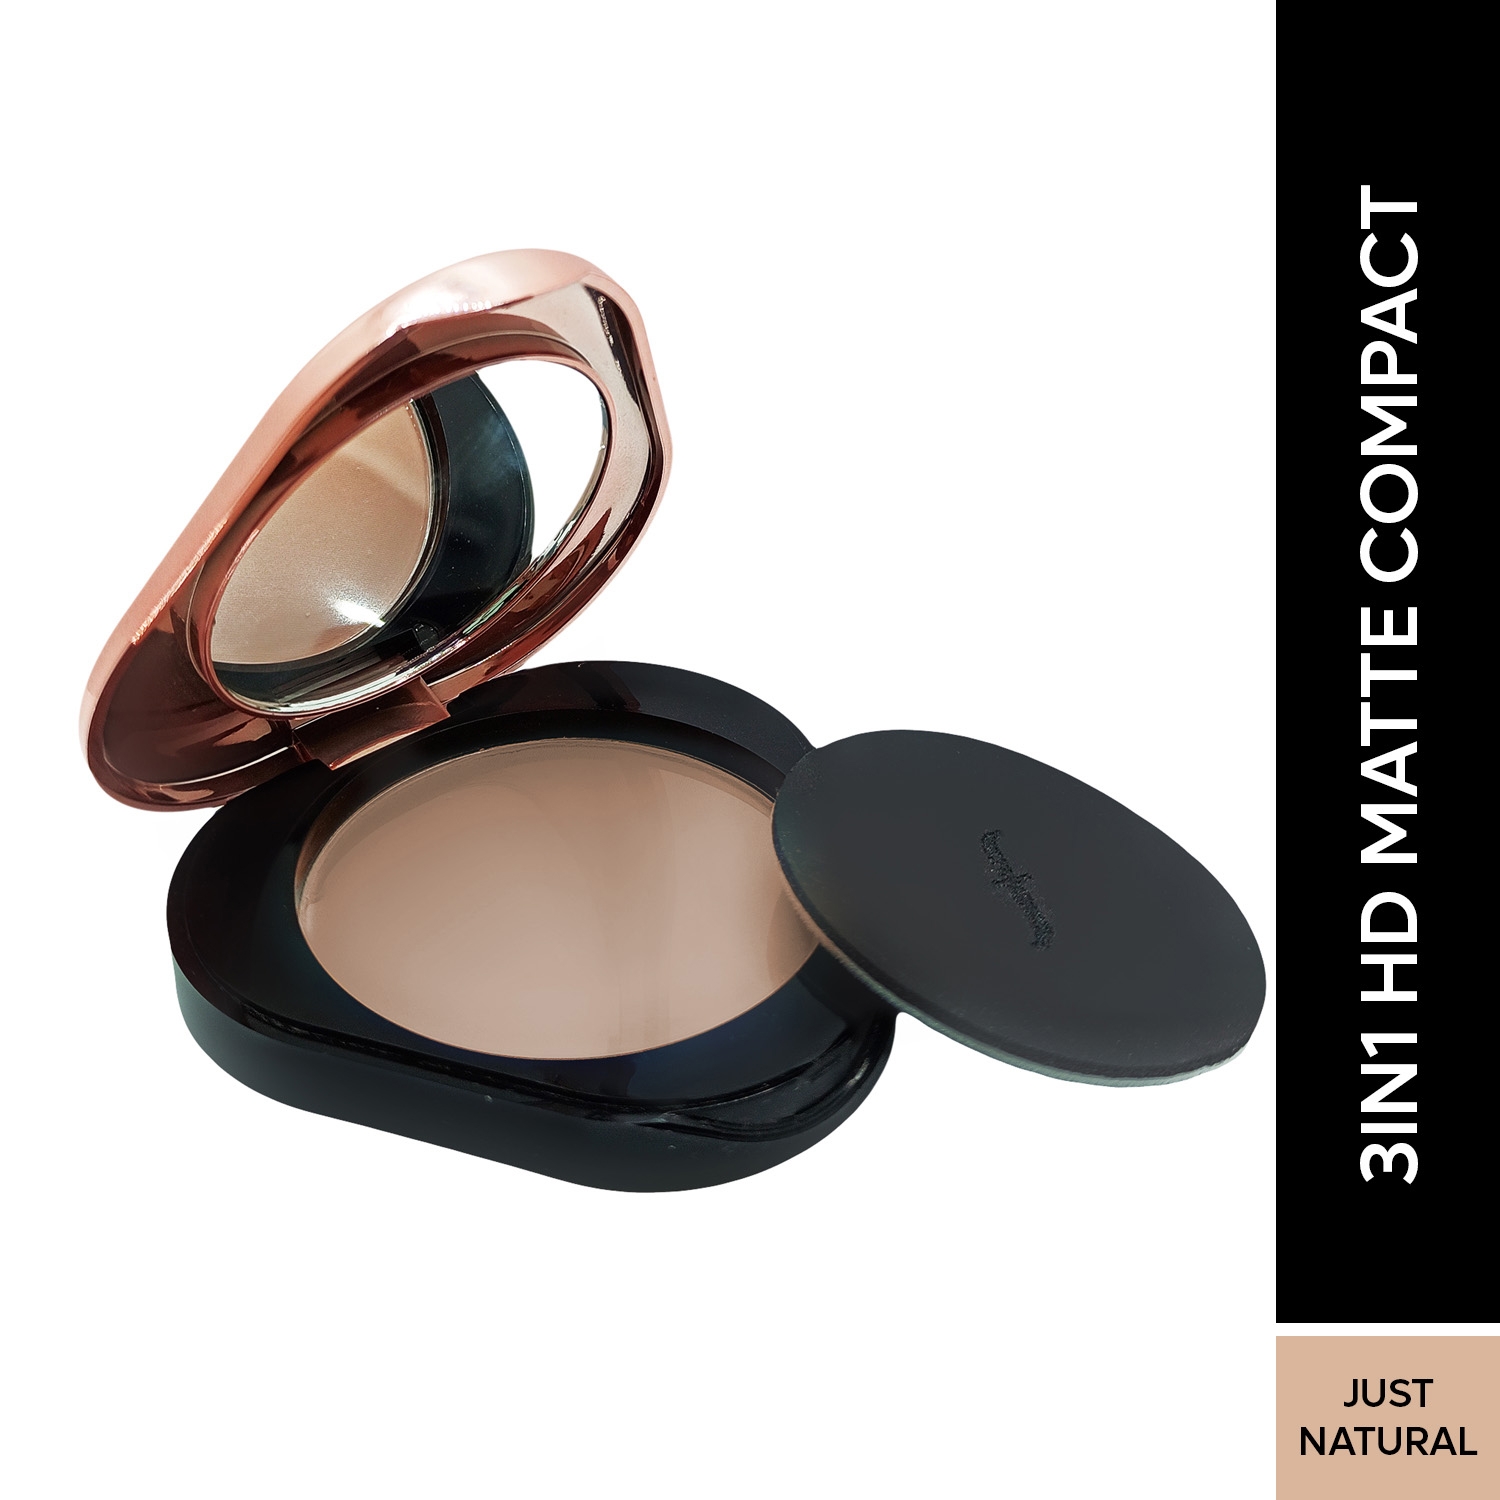 Faces Canada | Faces Canada 3 in 1 HD Matte Compact + Foundation + Hydration - Just Natural 02 (8g)